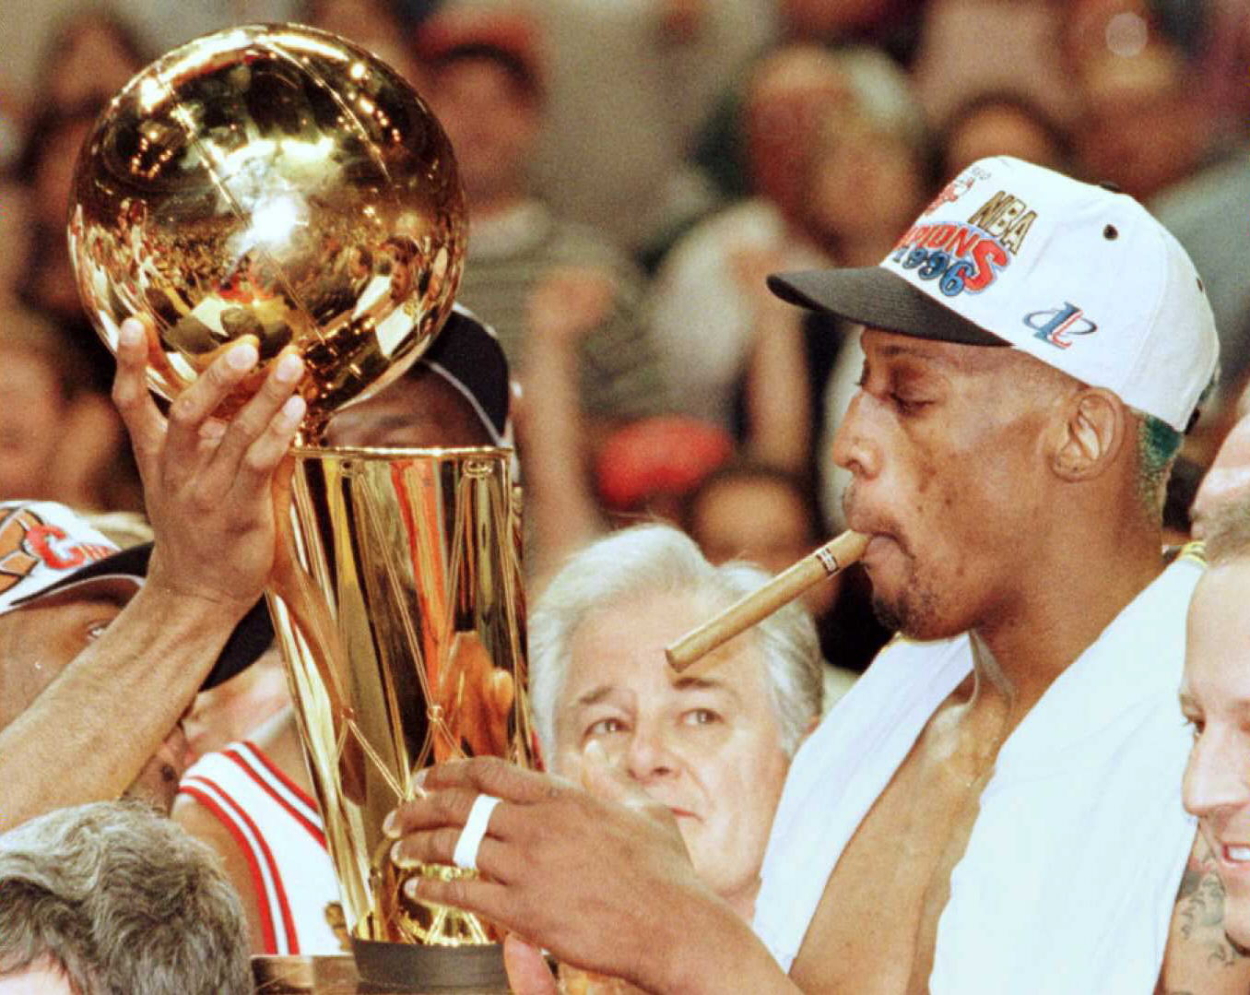 The Chicago Bulls' Dennis Rodman smokes a cigar after defeating the Seattle SuperSonics in Game 6 of the 1996 NBA Finals.